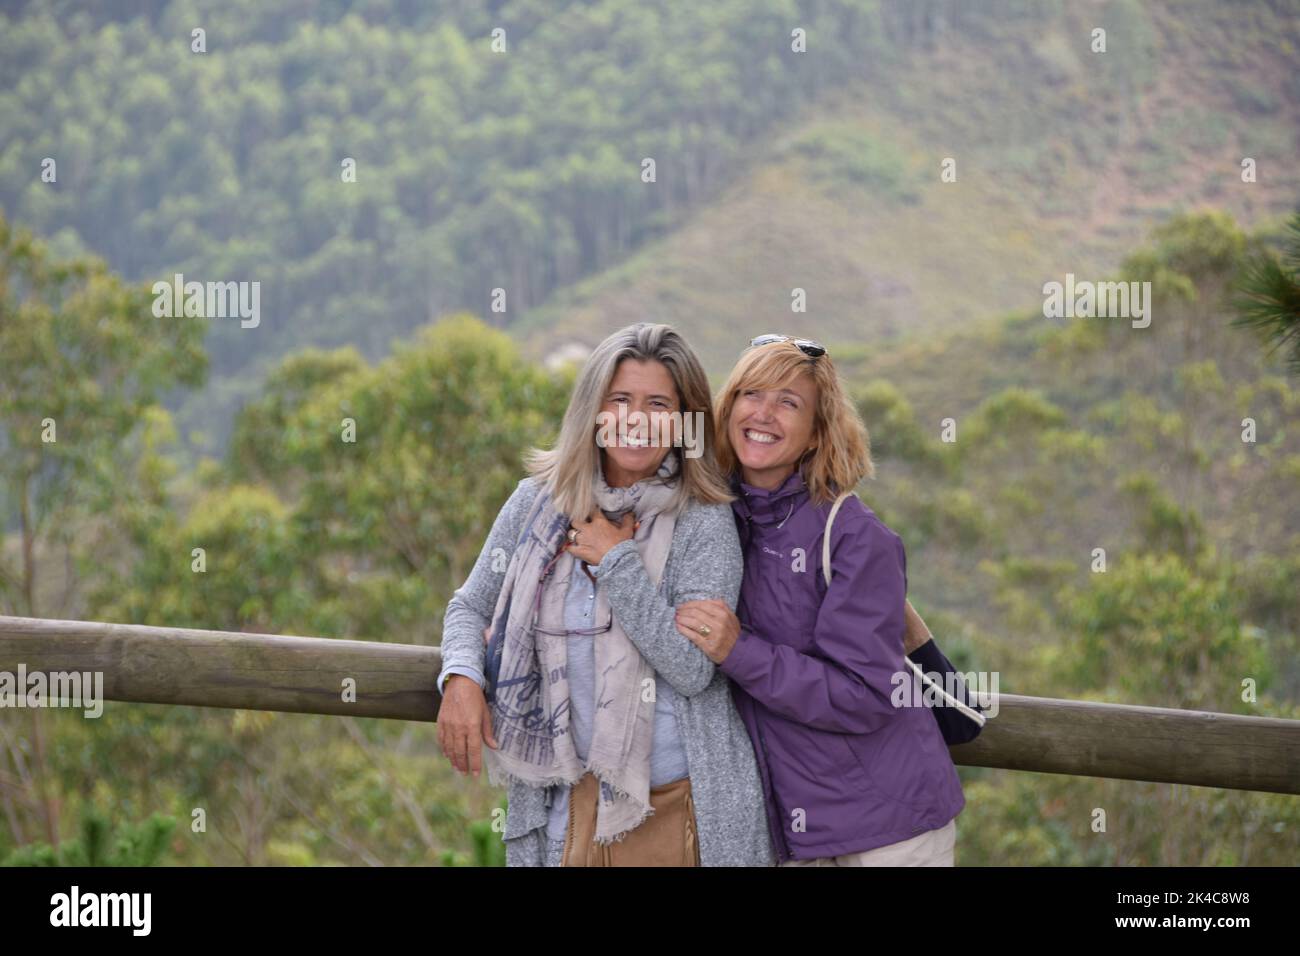 The two Caucasian women smiling and posing for a photo in the nature Stock Photo